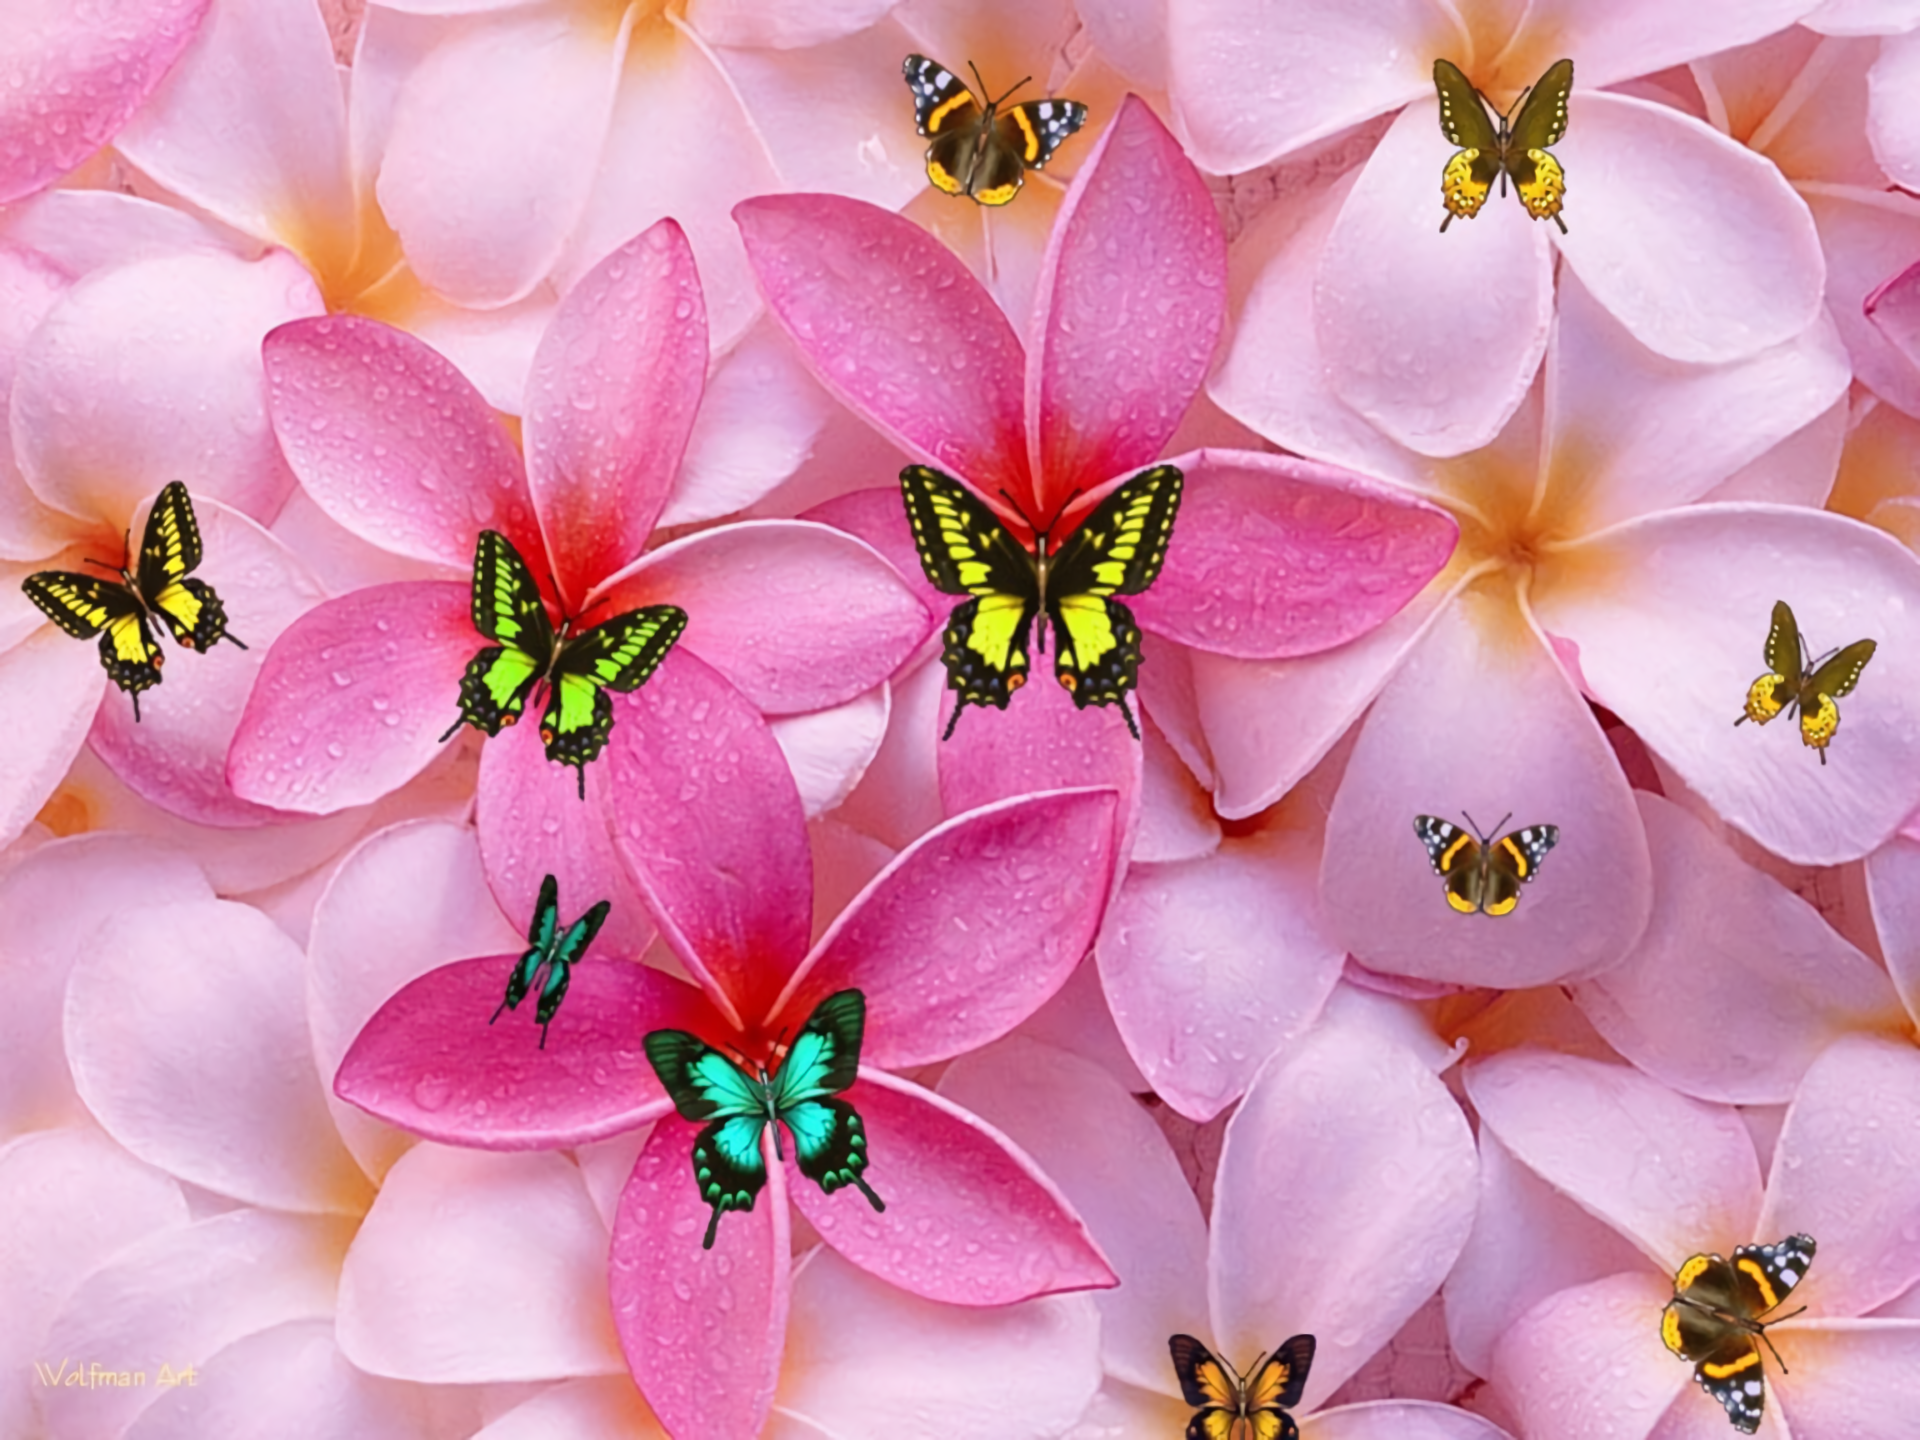 Pink Plumeria and Butterflies by WolfmanArt